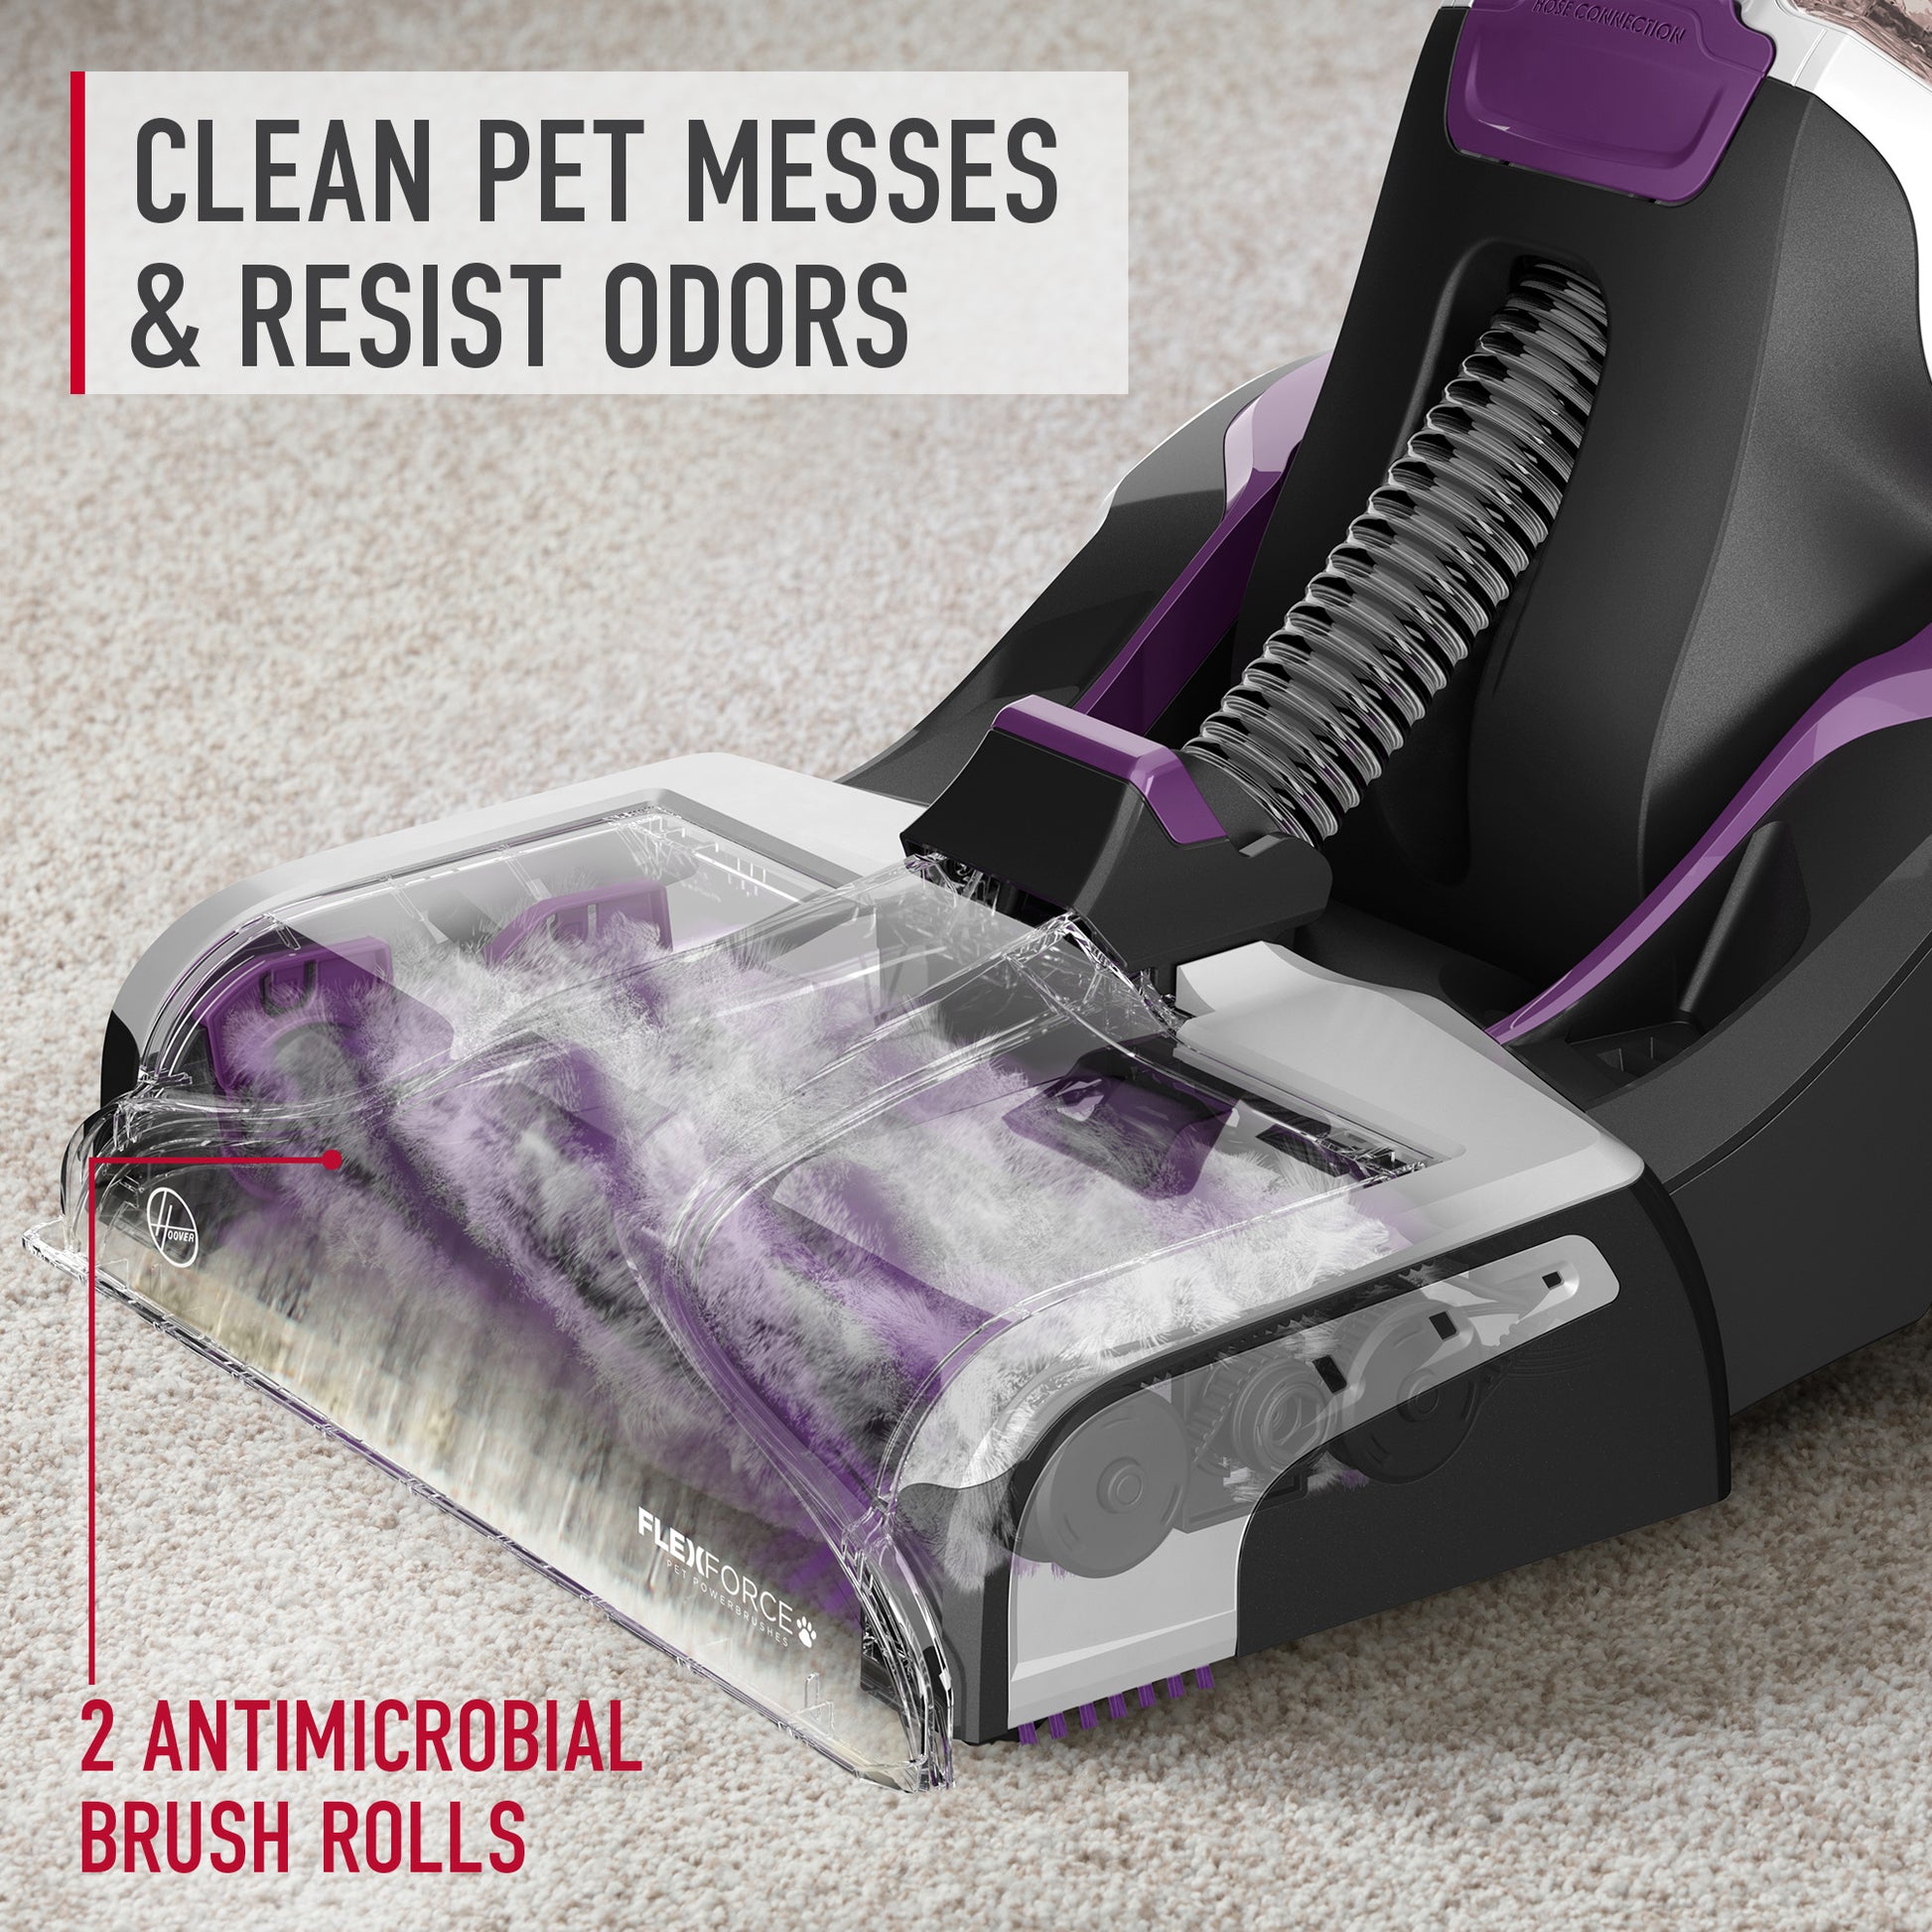 Close up of Smartwash pet complete automatic carpet cleaner showing 2 antimicrobial brush rolls to effectively clean pet messes and resist odors